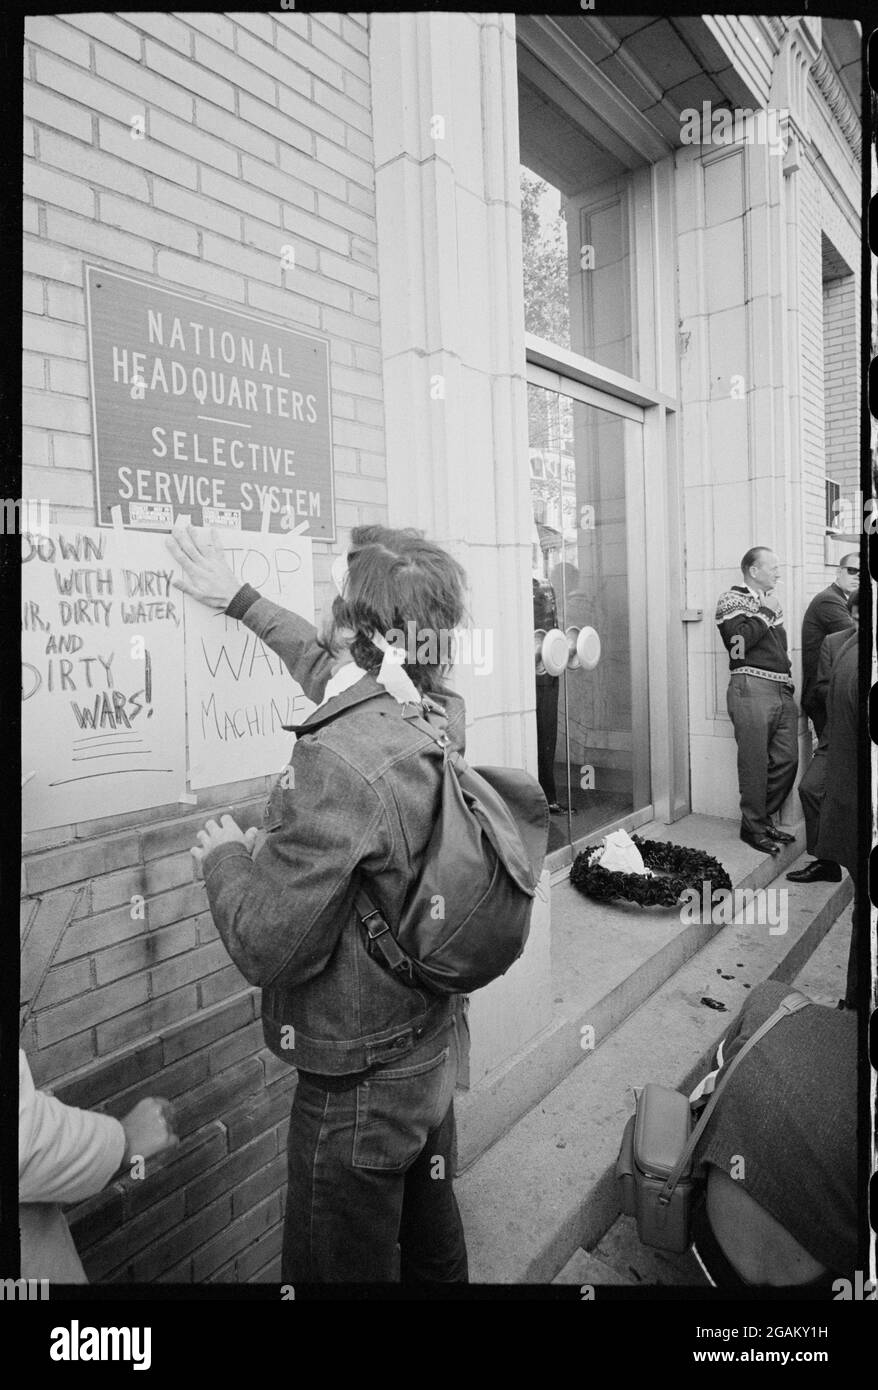 A demonstrator posts signs protesting the Vietnam War near the entrance of the Selective Service during the Moratorium to End the War, Washington, DC, 10/15/1969.  (Photo by Warren K Leffler/US News & World Report Collection/RBM Vintage Images) Stock Photo